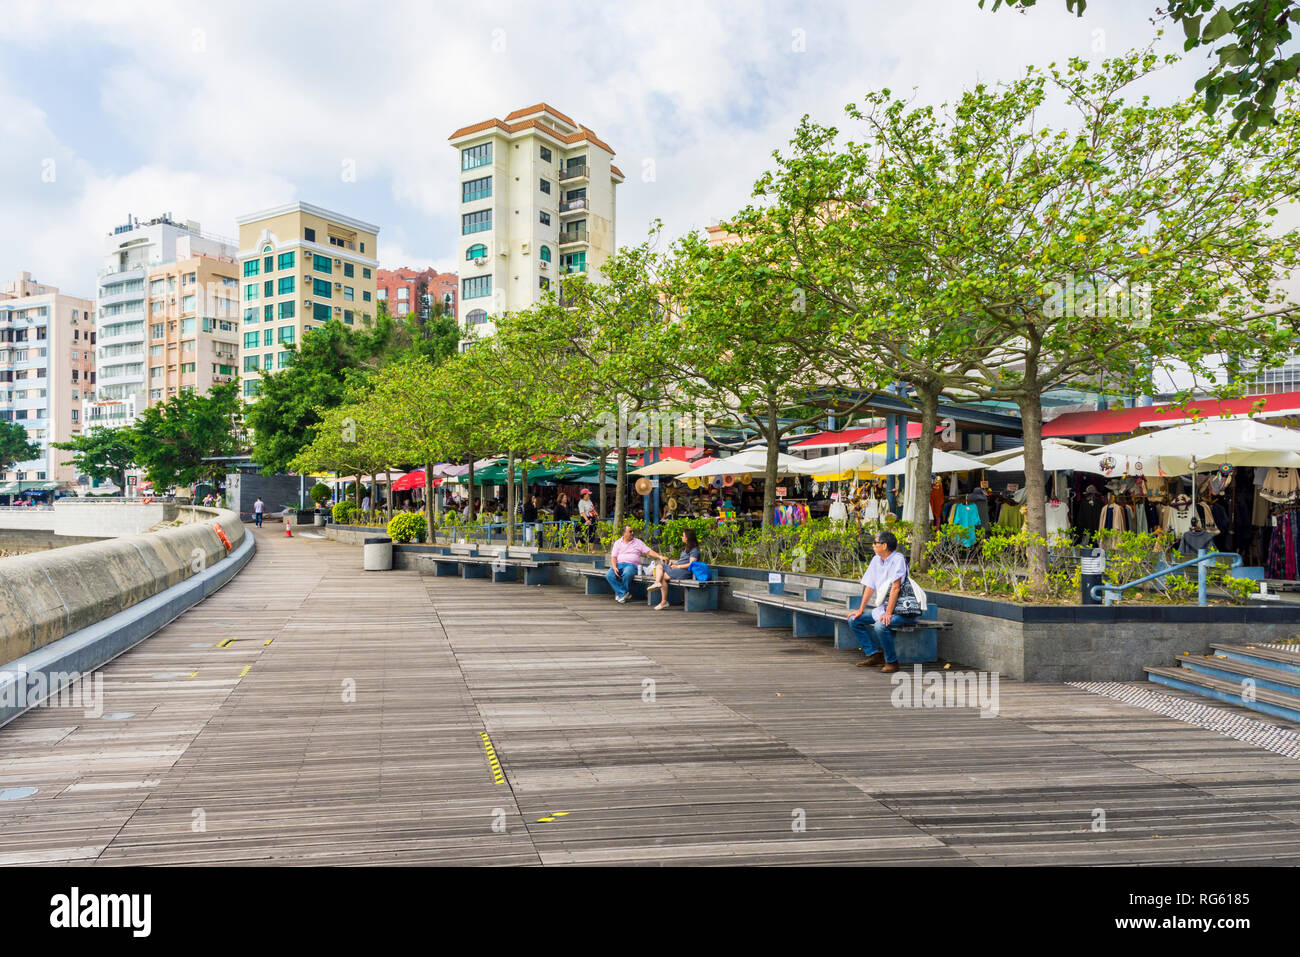 The waterfront market and cafe lined promenade of Stanley, Hong Kong Stock Photo